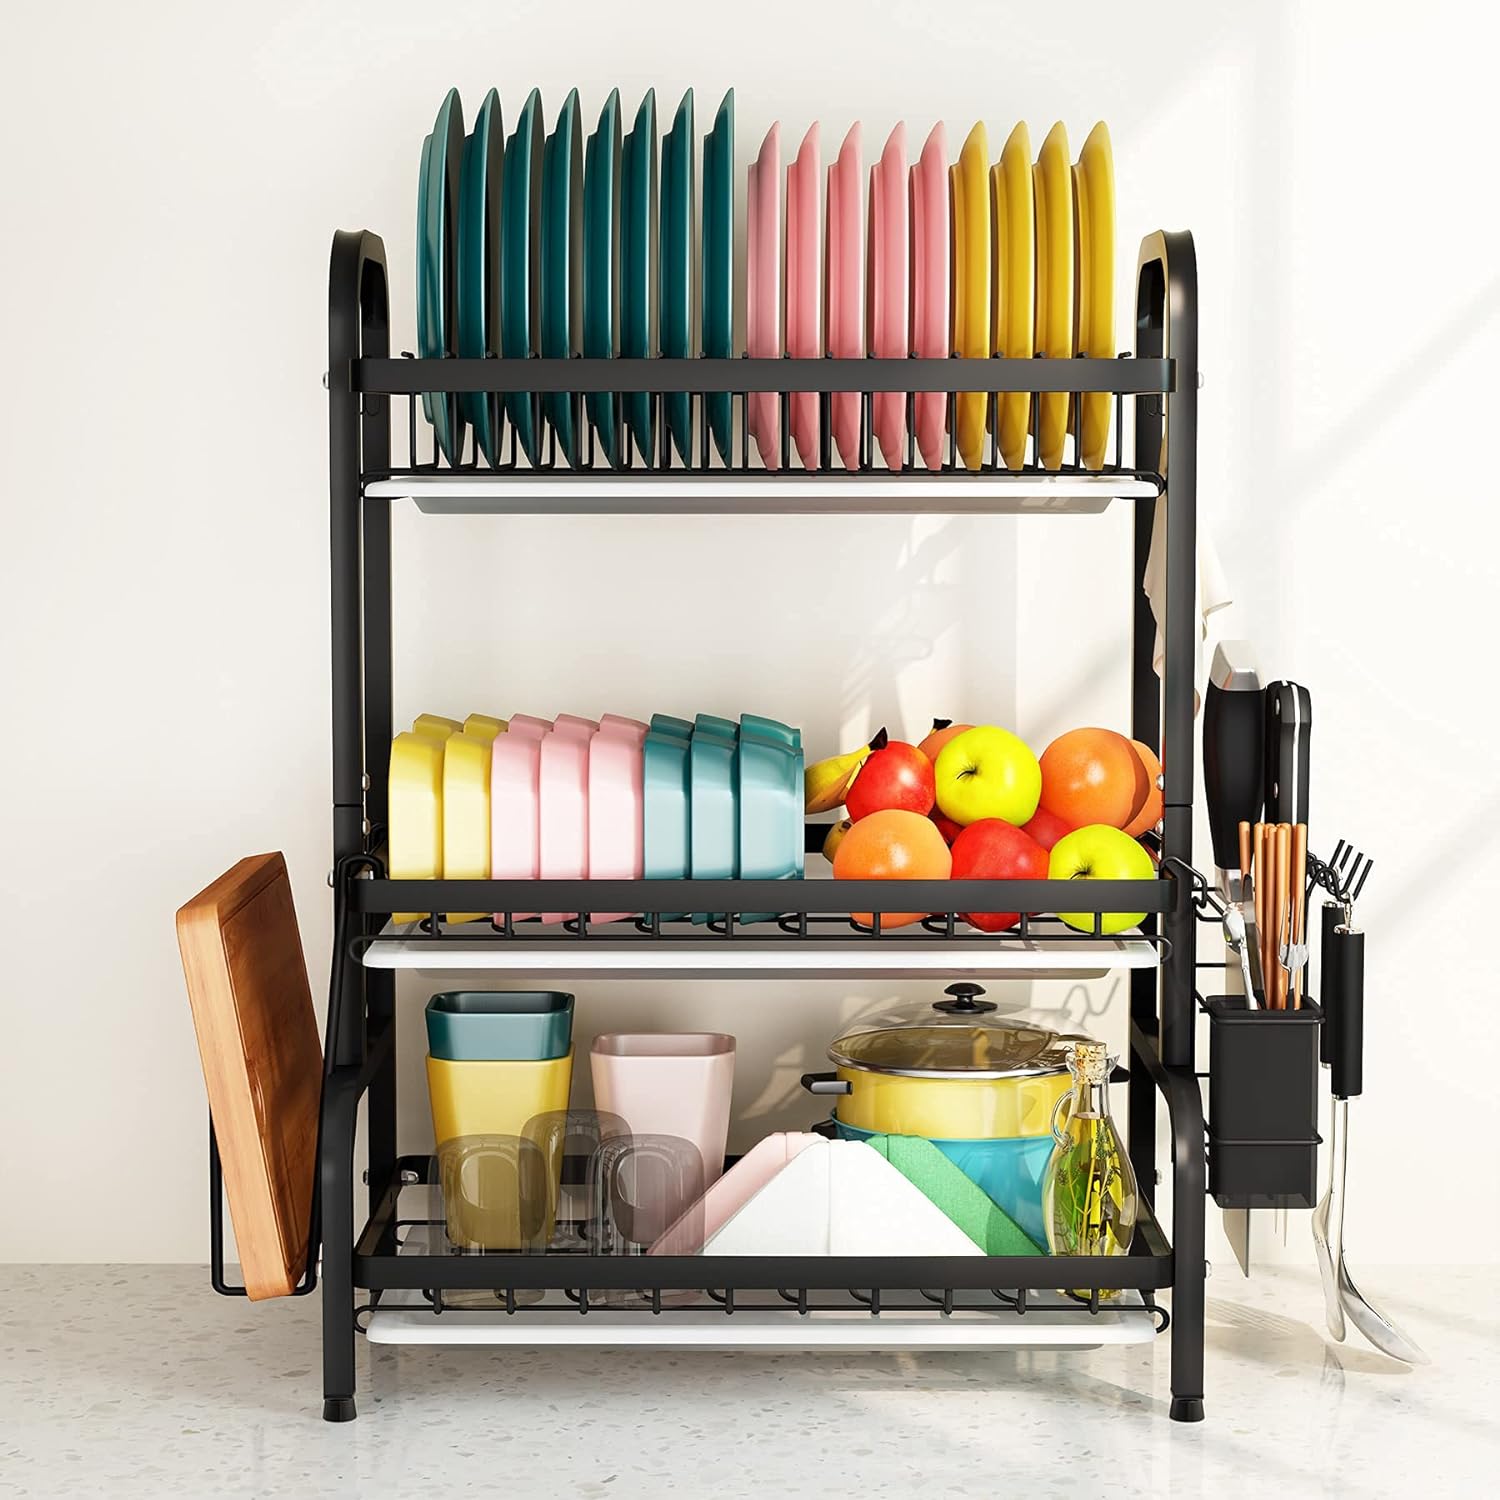 Kitchen Dish Drying Rack with items in it